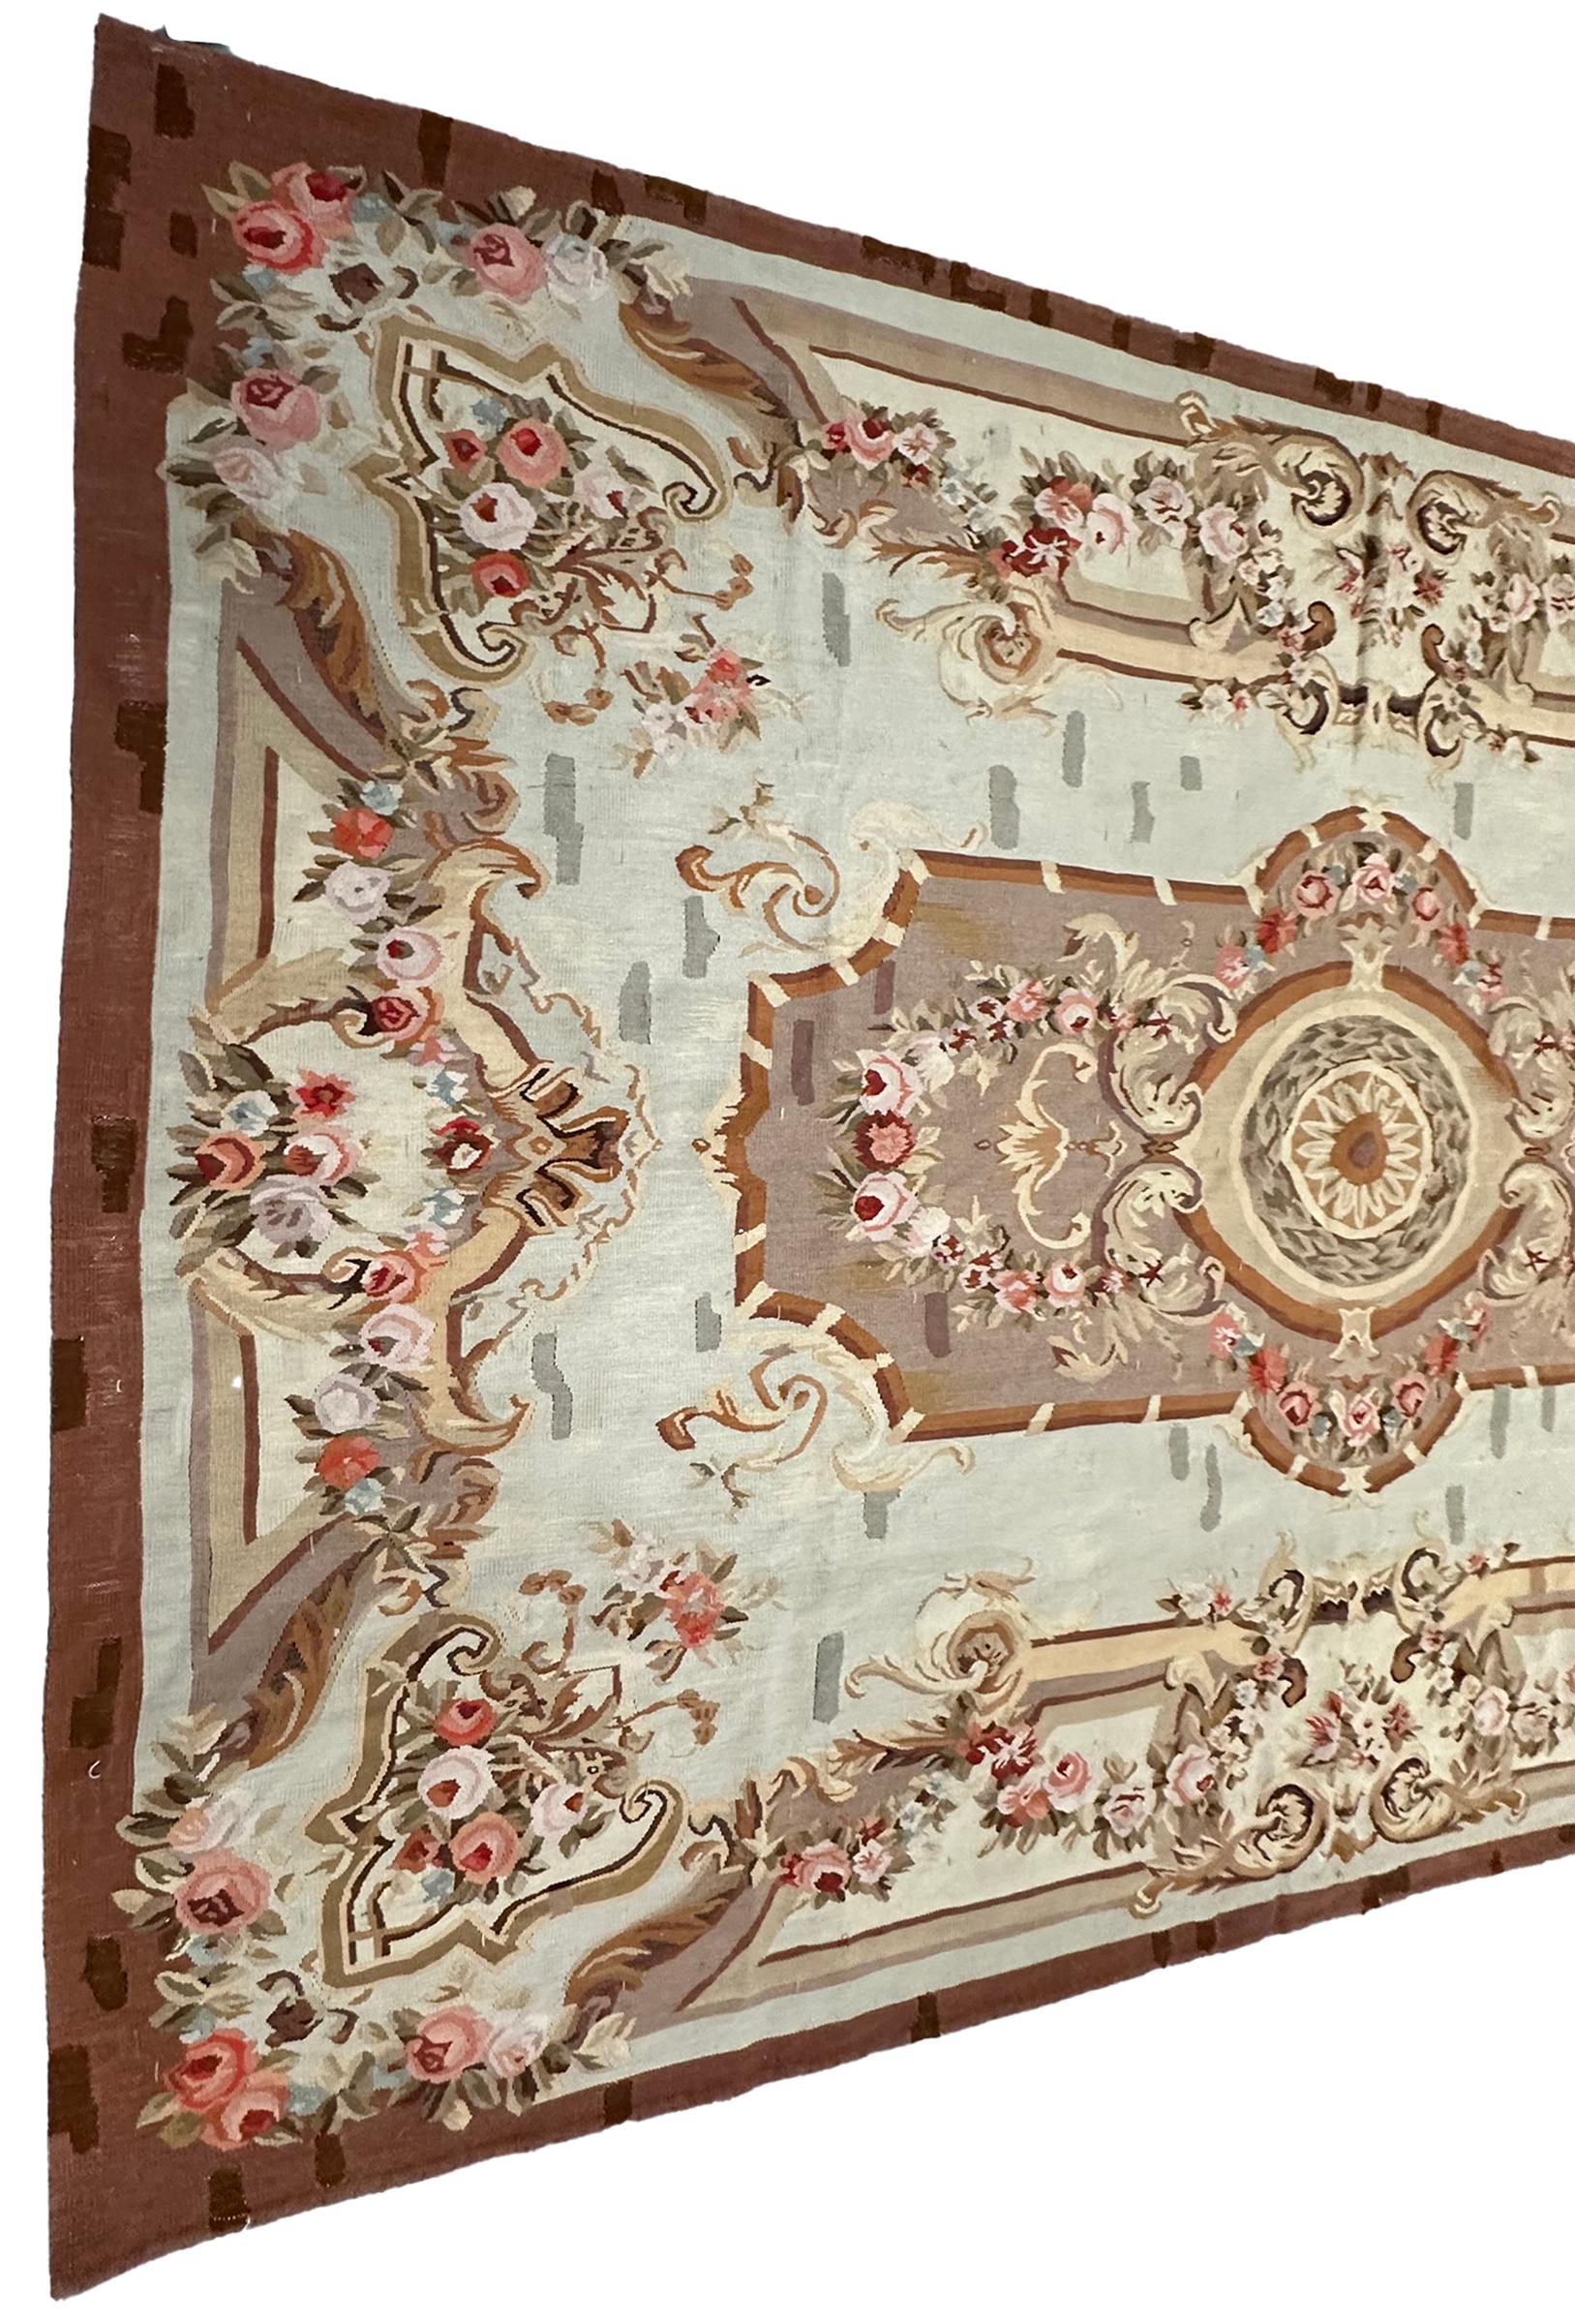 Hand-Knotted Antique French Aubusson Rug Hand Woven 1880 6x7ft Rare Design 178cm x 206cm For Sale